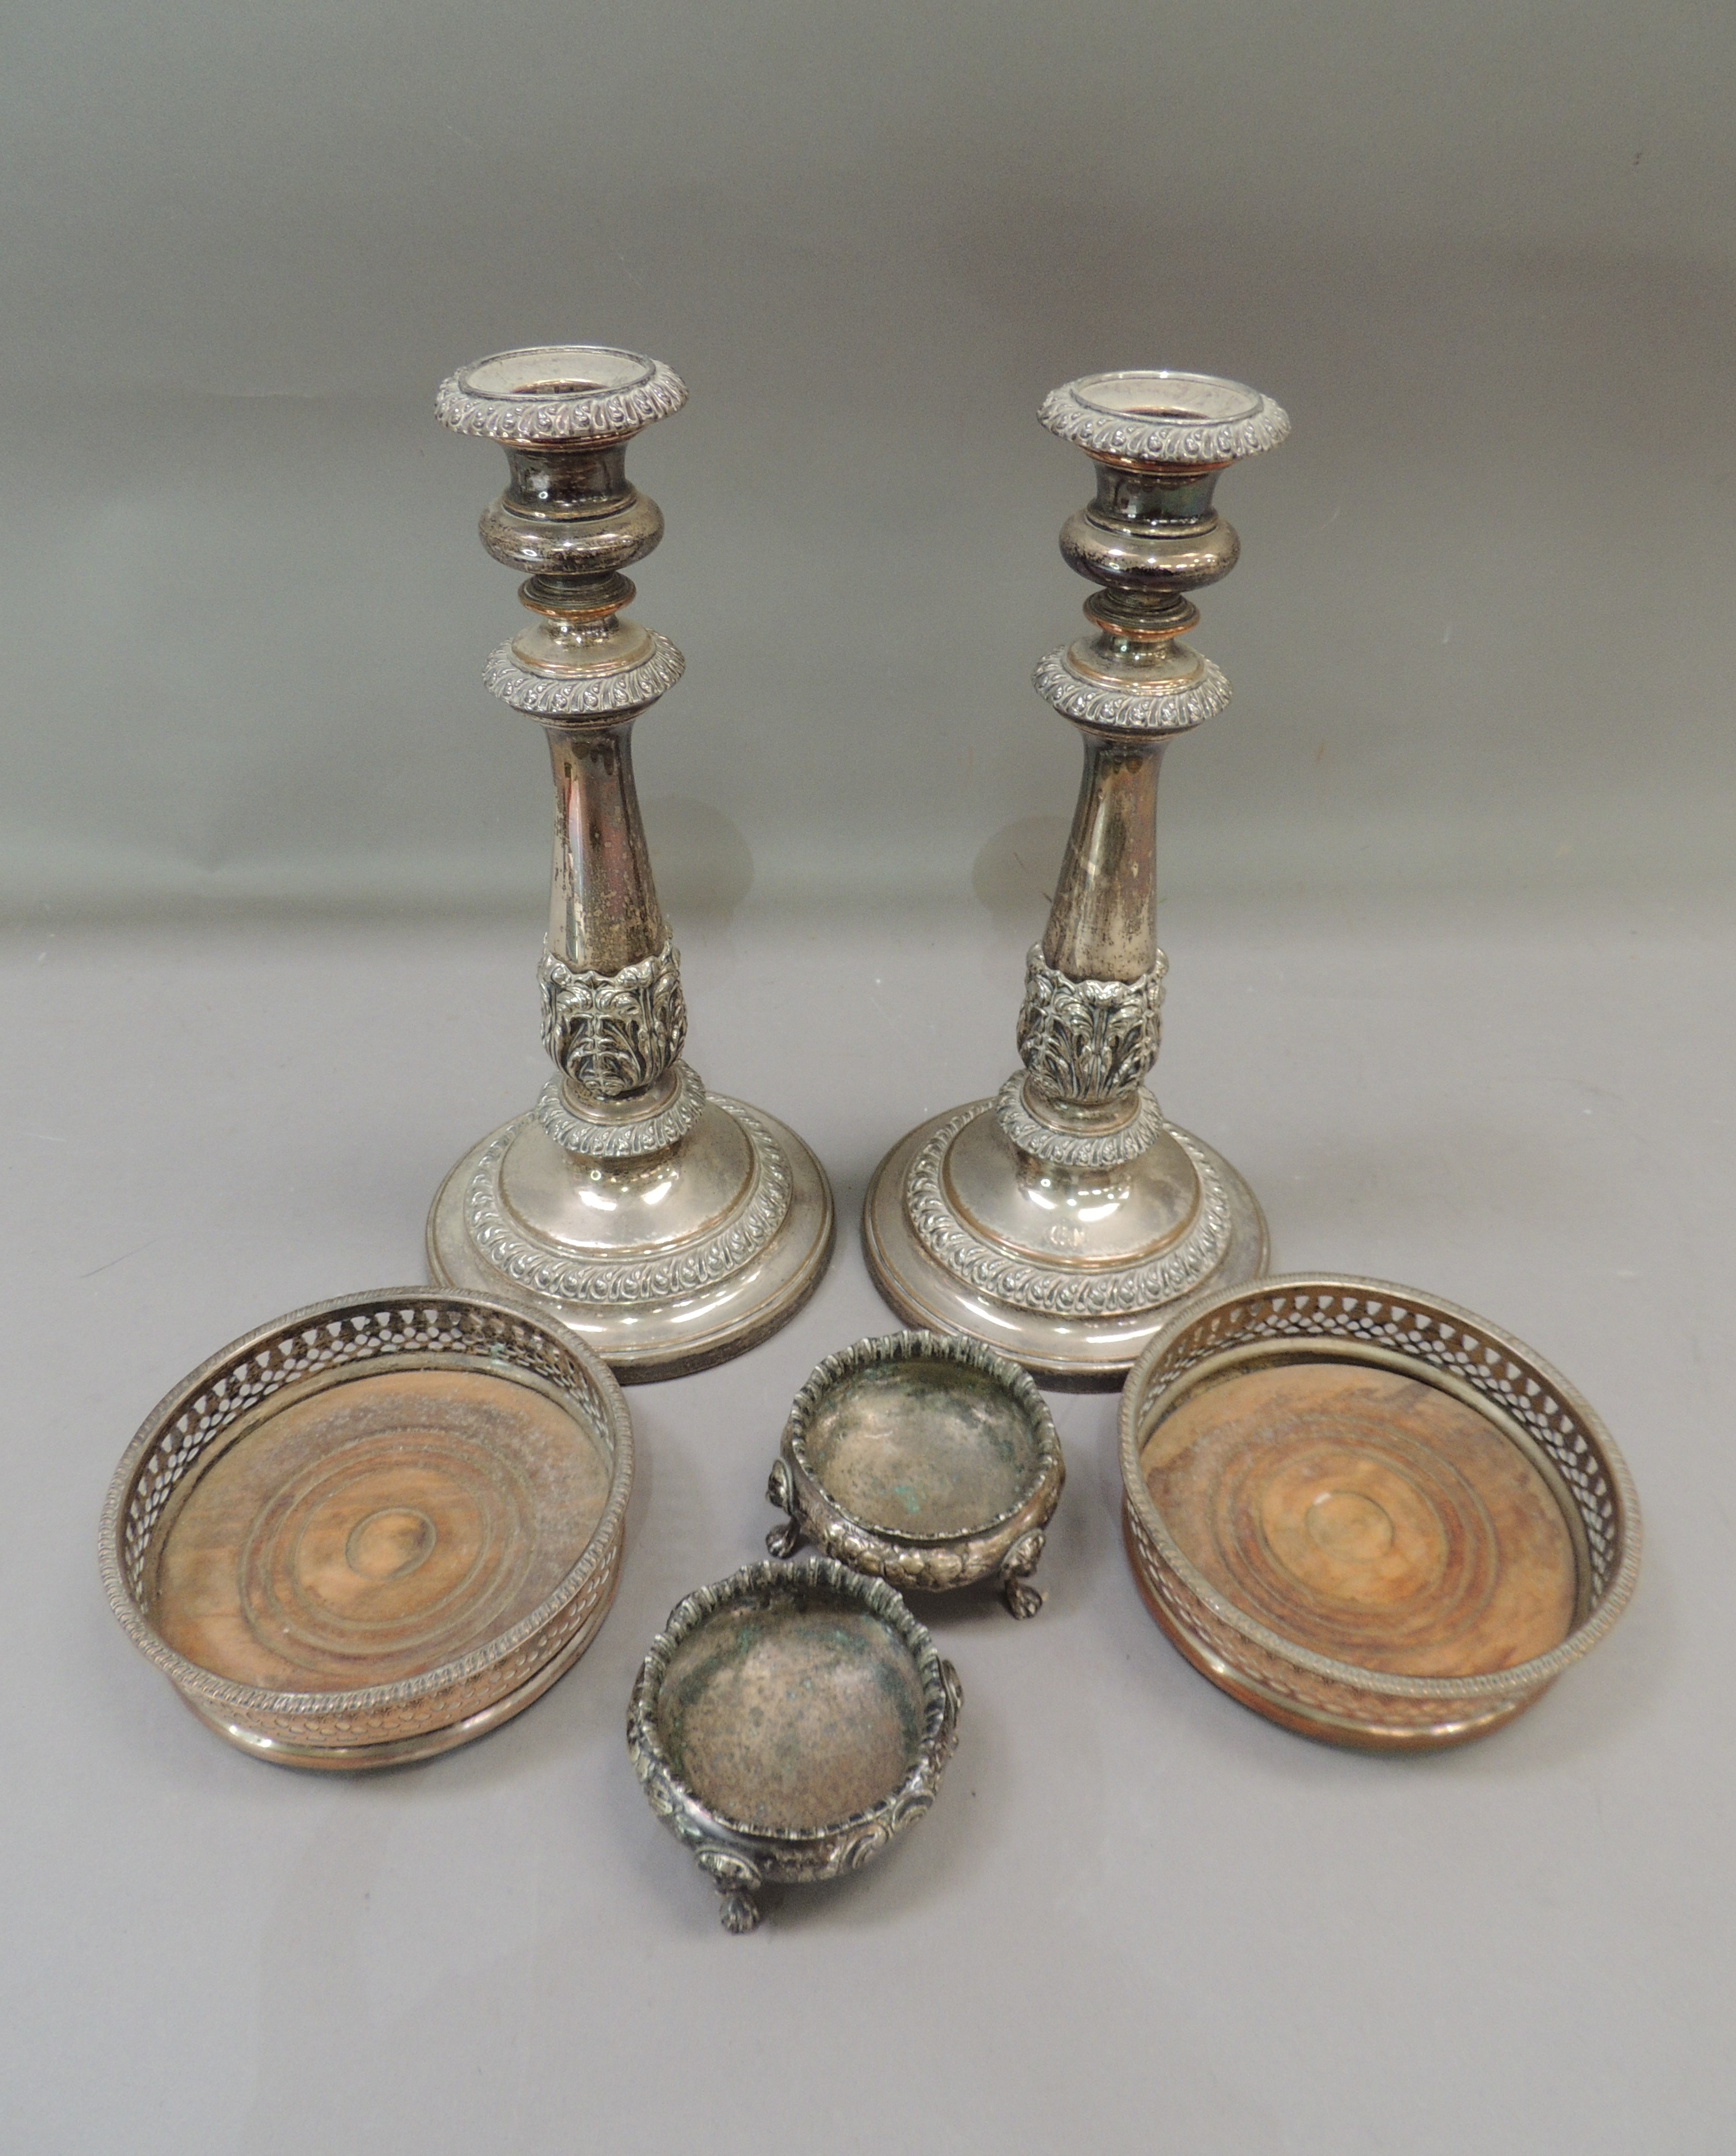 A pair of Victorian silver plate on copper table candle sticks in Regency style, foliate wrapped